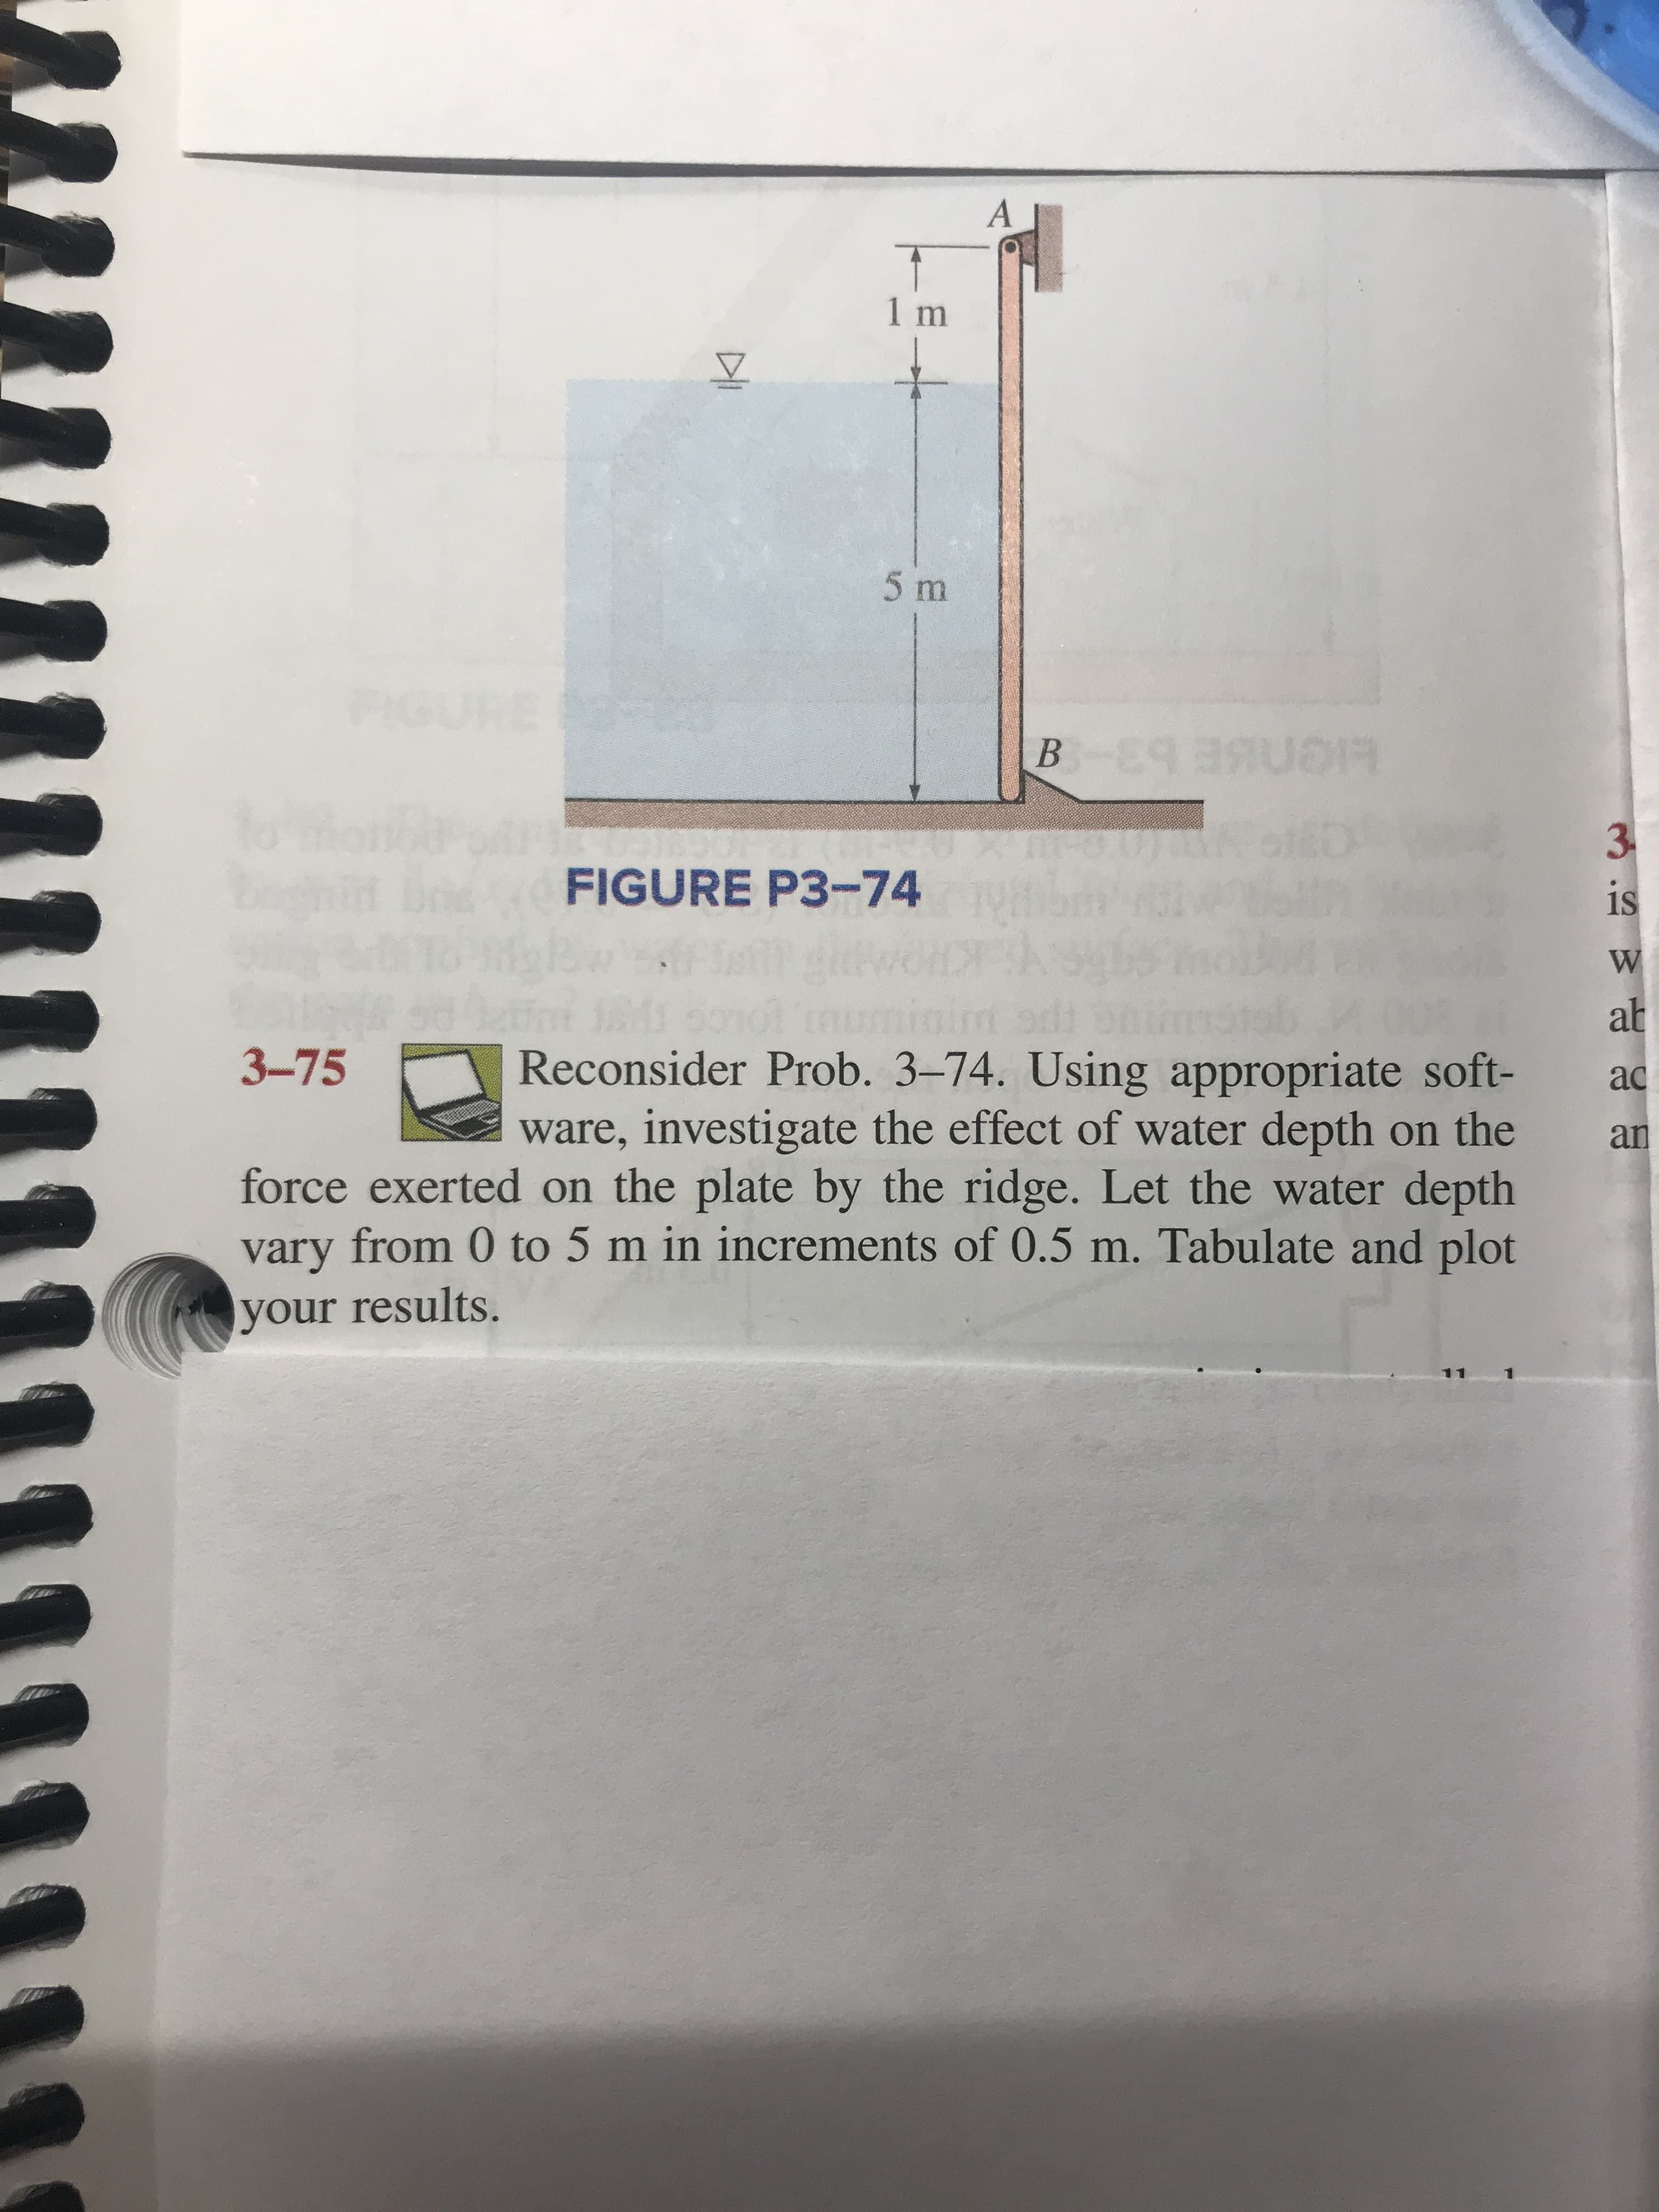 A
1 m
5 m
B E SR
3
FIGURE P3-74
is
W
M 50
ab
Reconsider Prob. 3-74. Using appropriate soft-
ware, investigate the effect of water depth on the
force exerted on the plate by the ridge. Let the water depth
vary from 0 to 5 m in increments of 0.5 m. Tabulate and plot
3-75
ac
an
your results.
